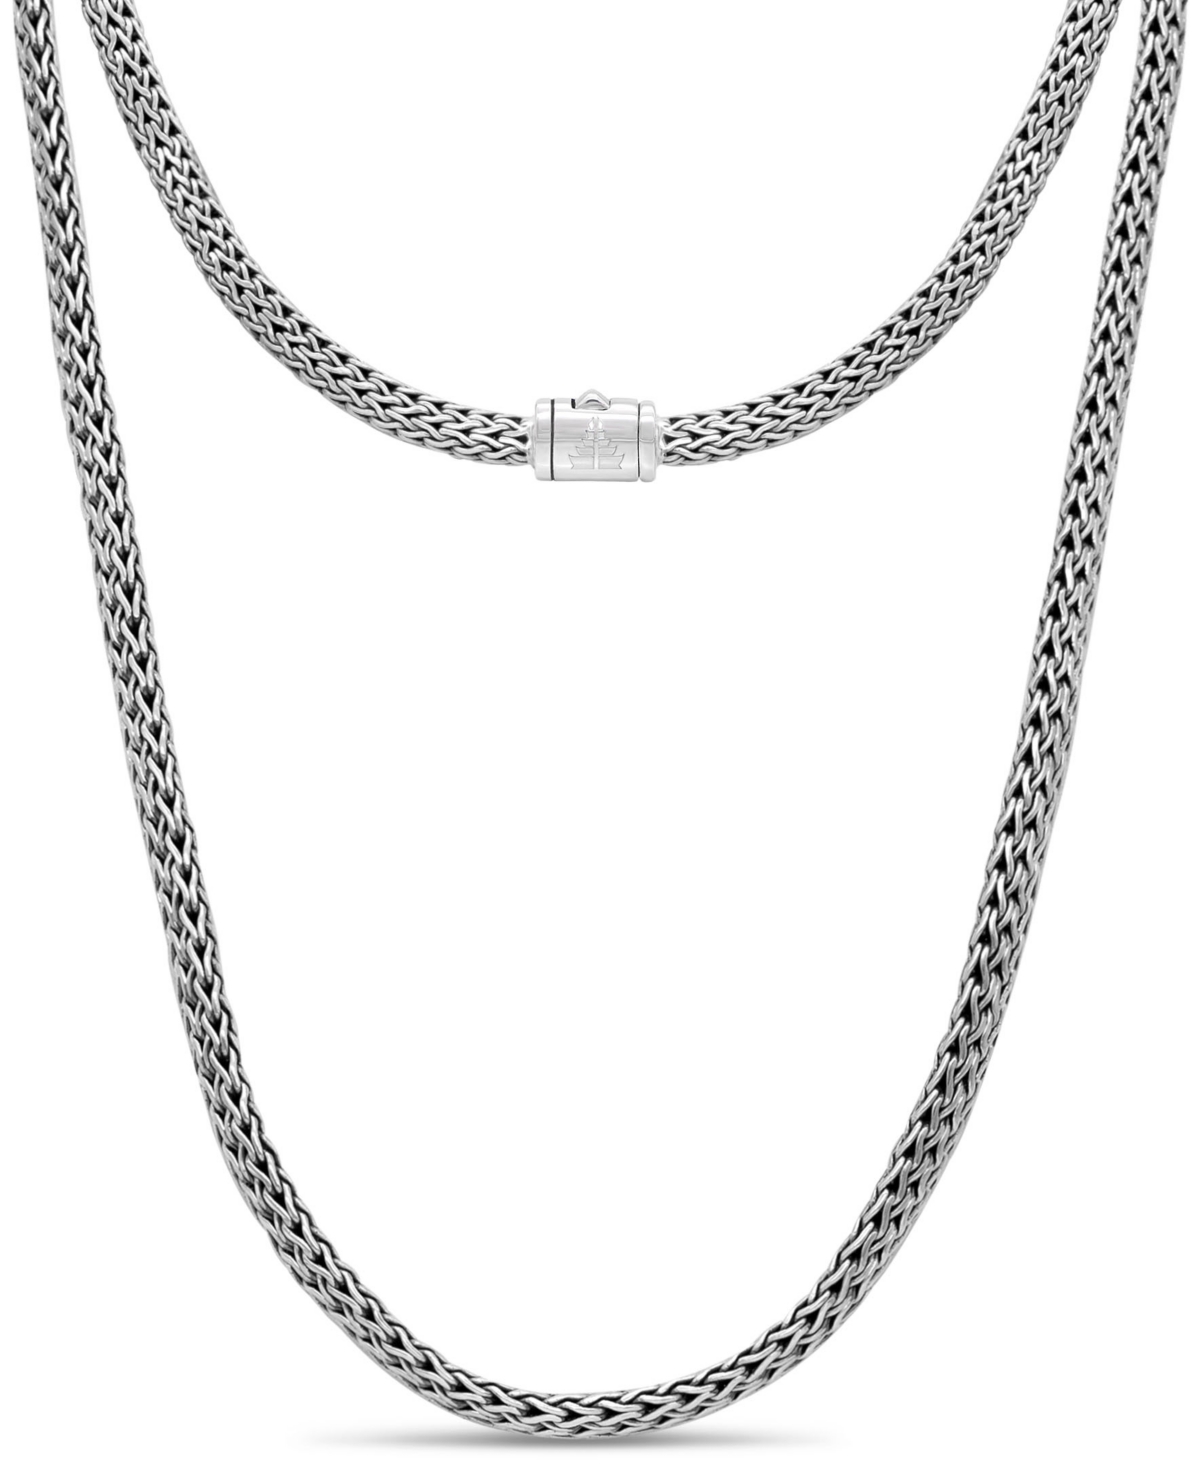 Dragon Bone Oval 5mm Chain Necklace in Sterling Silver - Silver